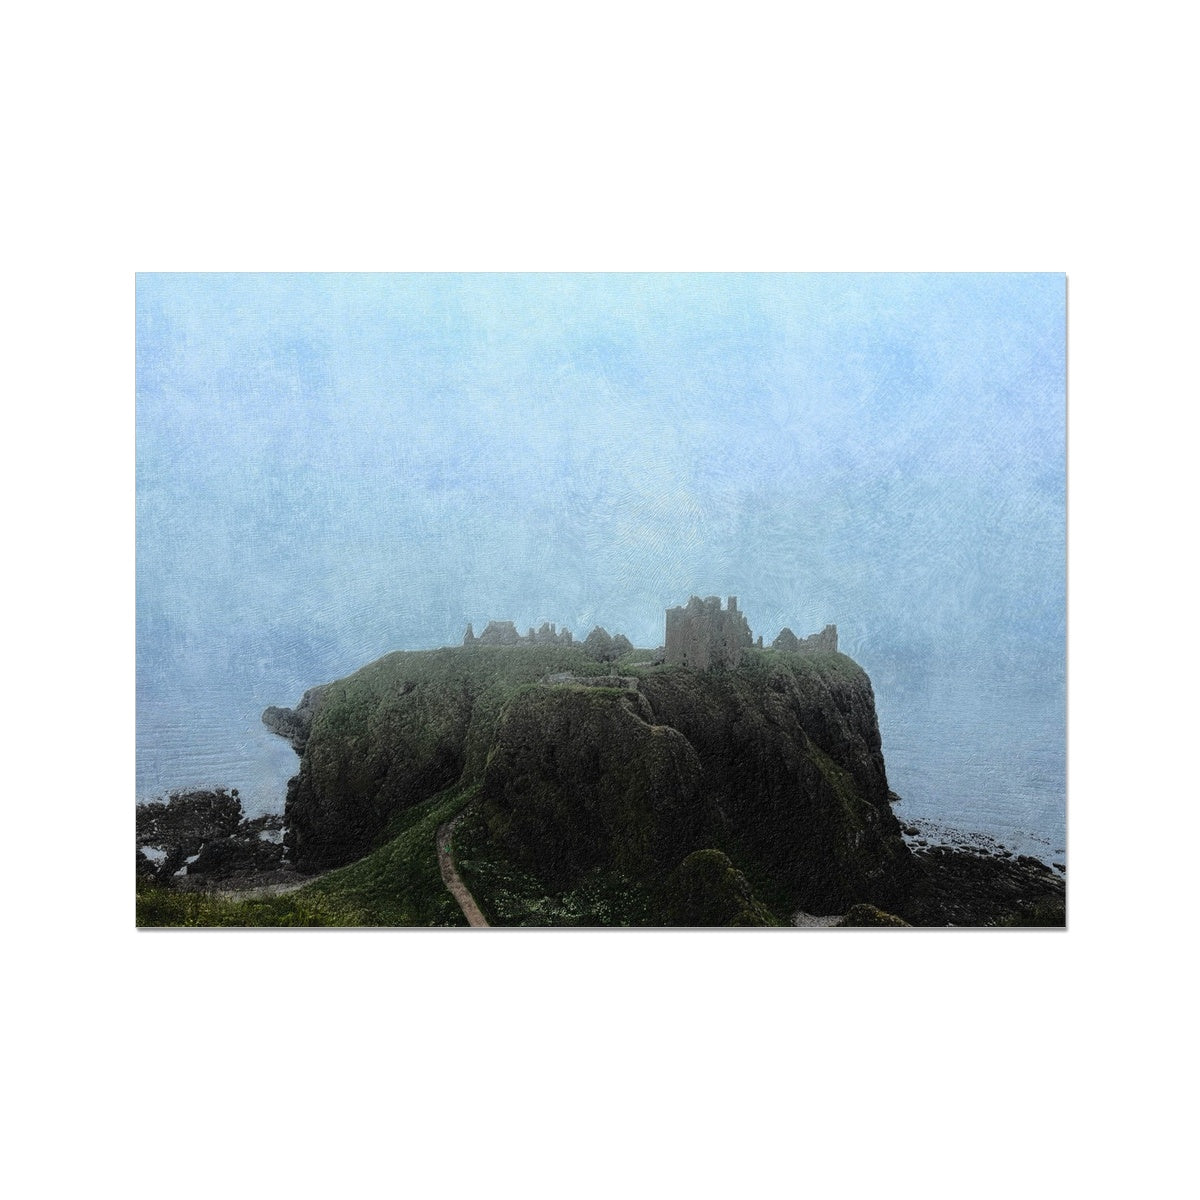 Dunnottar Castle Mist Painting | Fine Art Prints From Scotland-Unframed Prints-Historic & Iconic Scotland Art Gallery-A2 Landscape-Paintings, Prints, Homeware, Art Gifts From Scotland By Scottish Artist Kevin Hunter